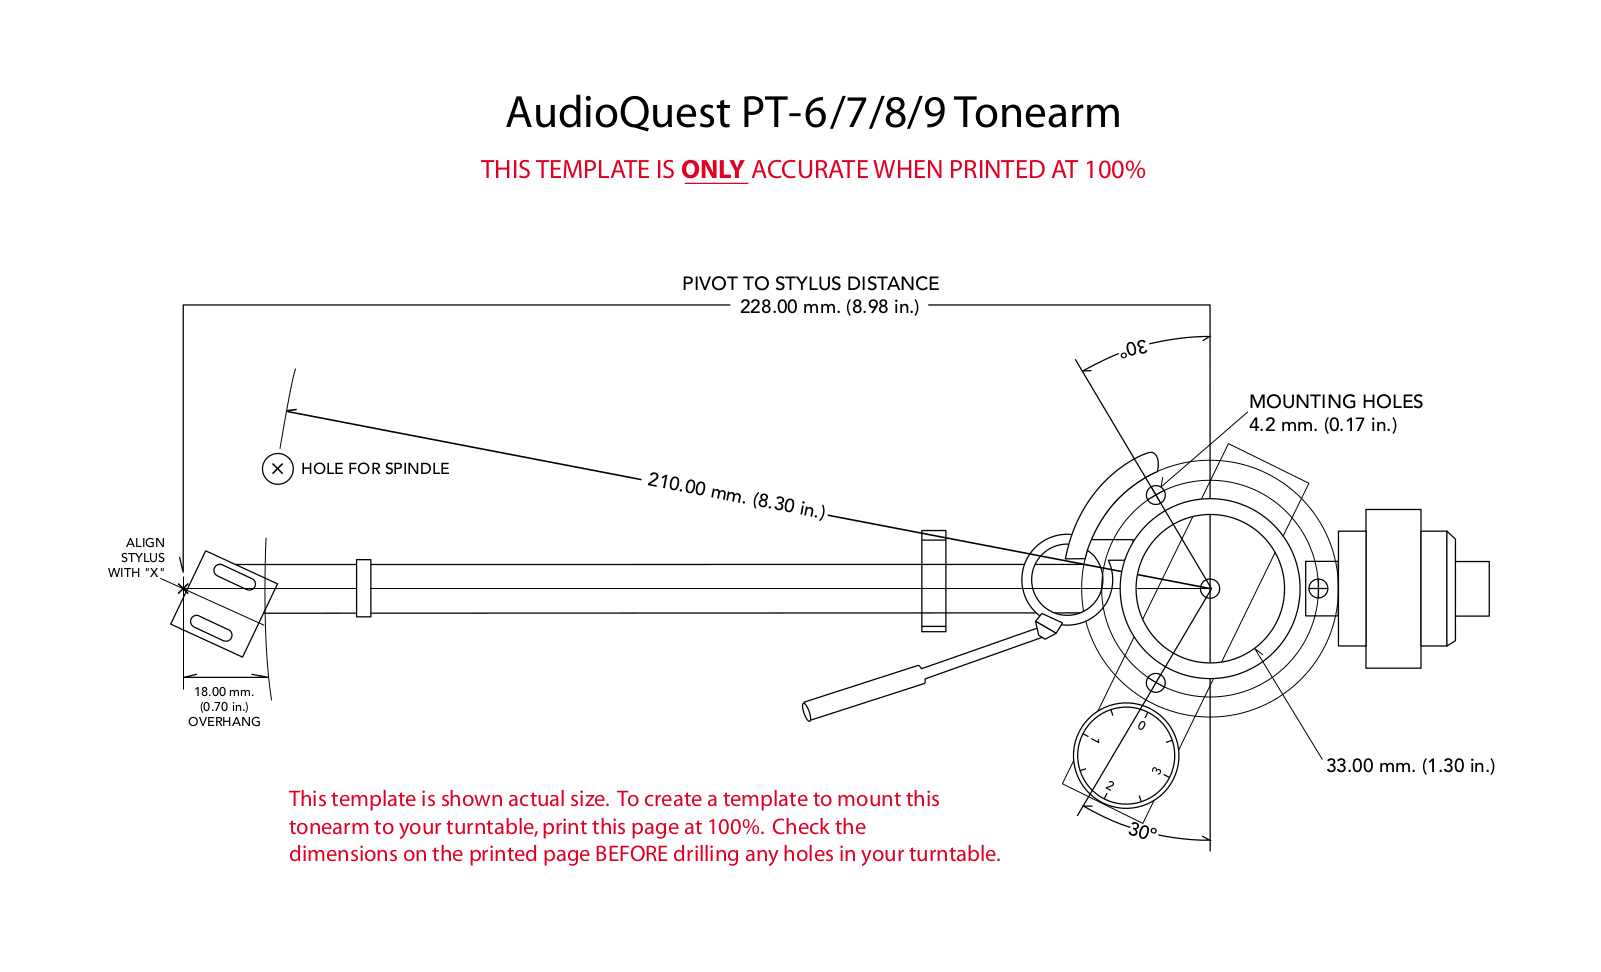 AudioQuest PT-6 Owners manual